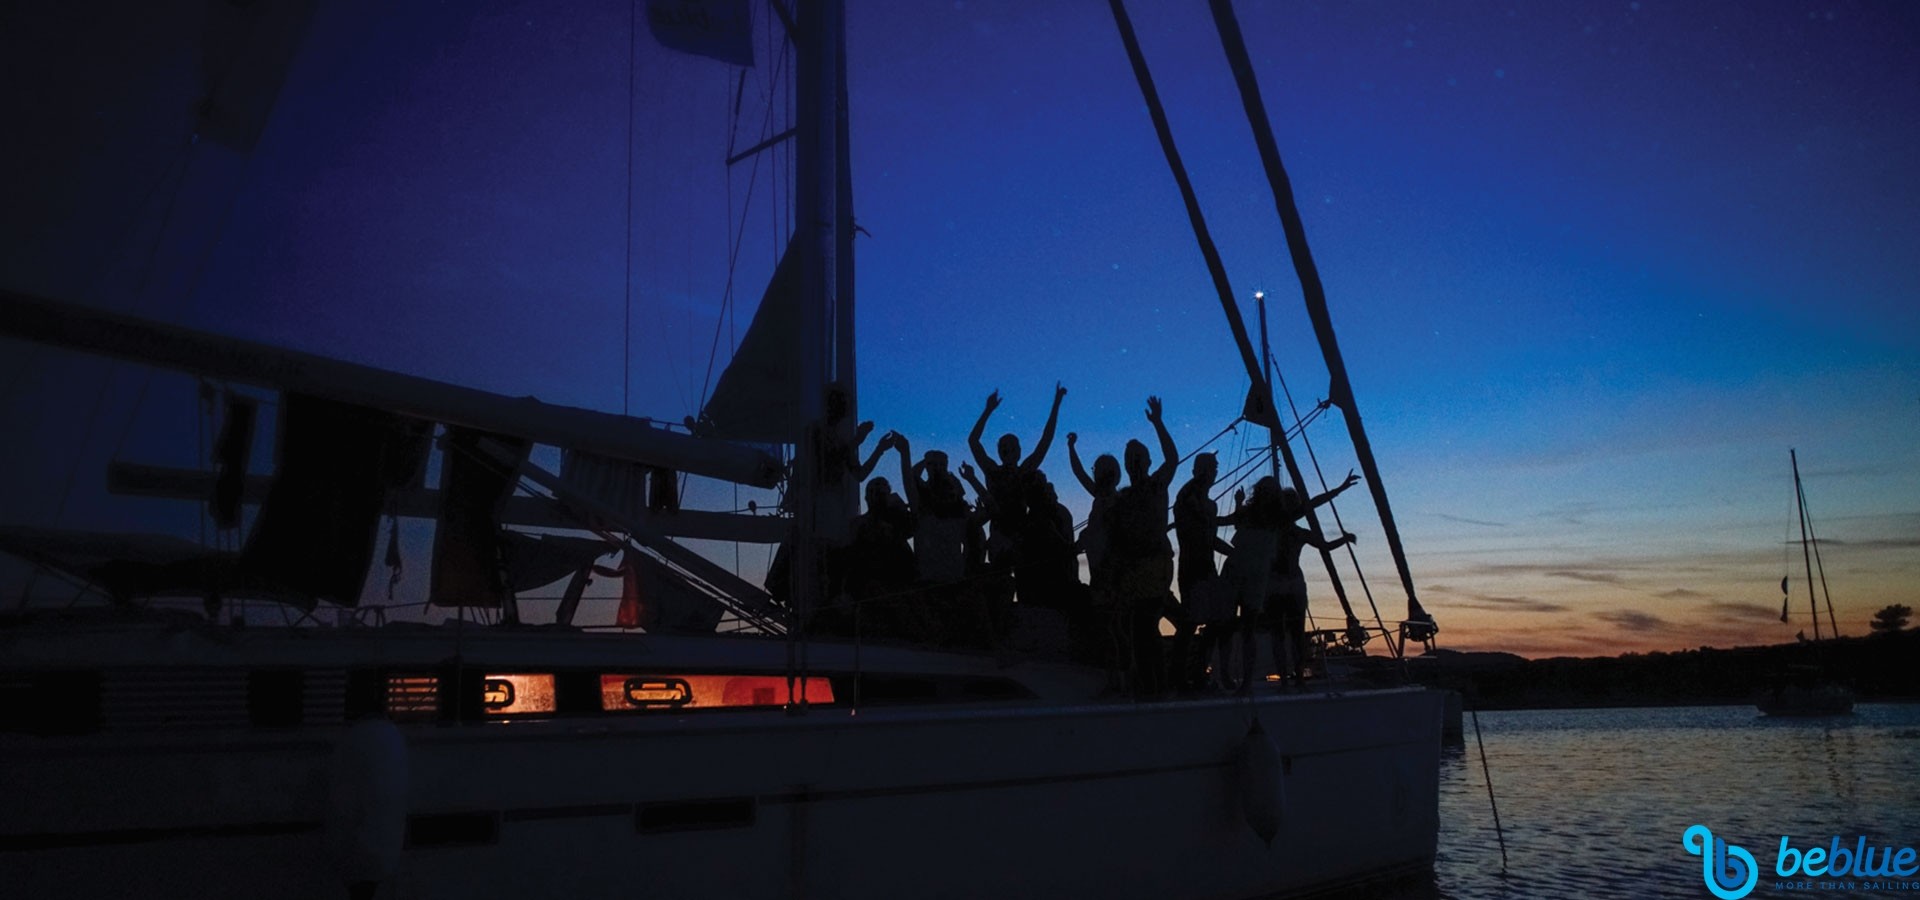 Bachelorette and Bachelor Party on a Sailboat